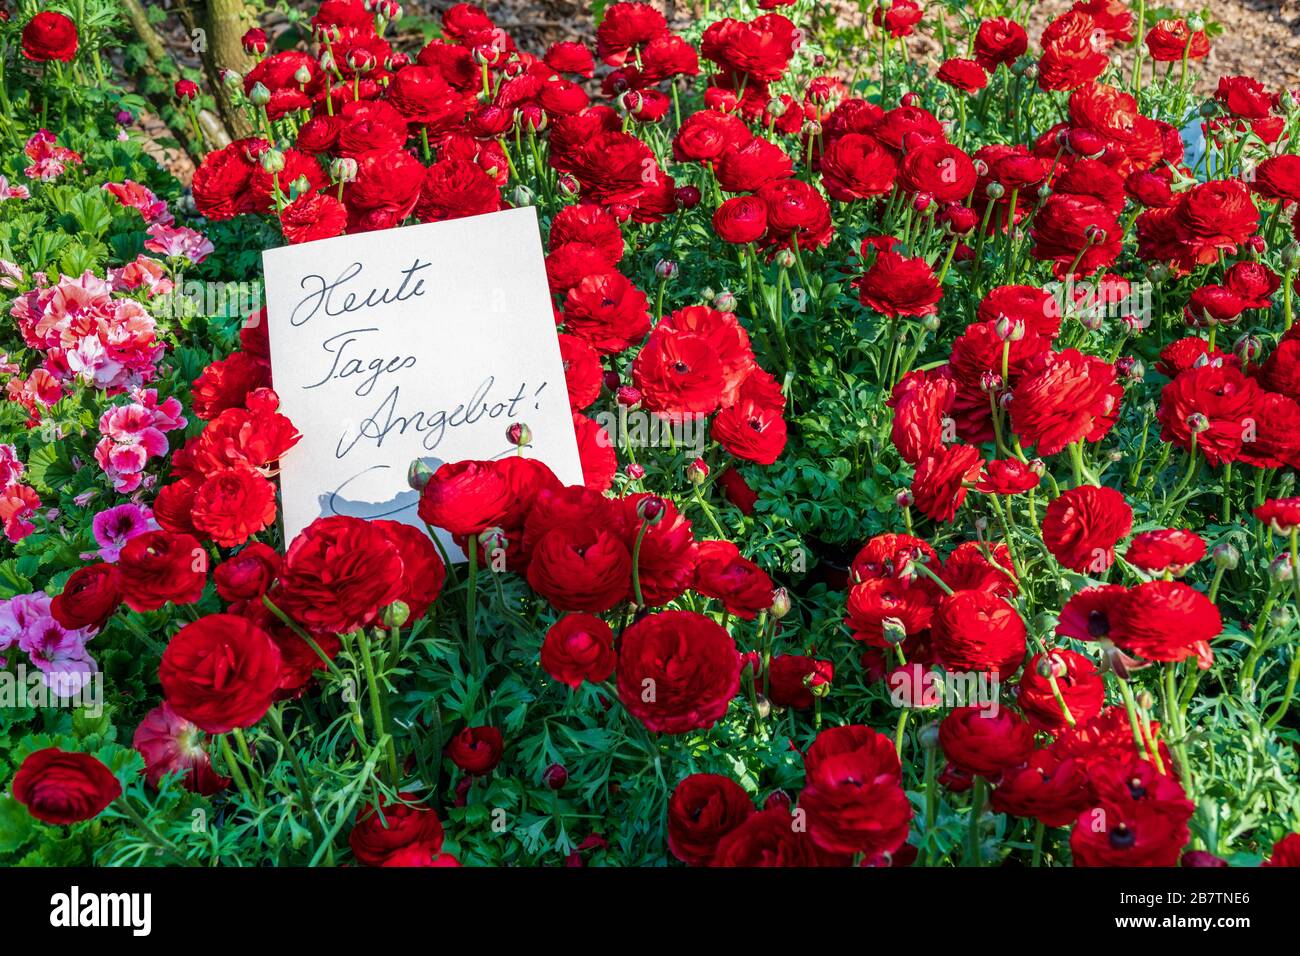 Bright red ranunculus flowers and white sign with handwritten German text 'Special offer of the day'. Concept of springtime or sale, discount Stock Photo